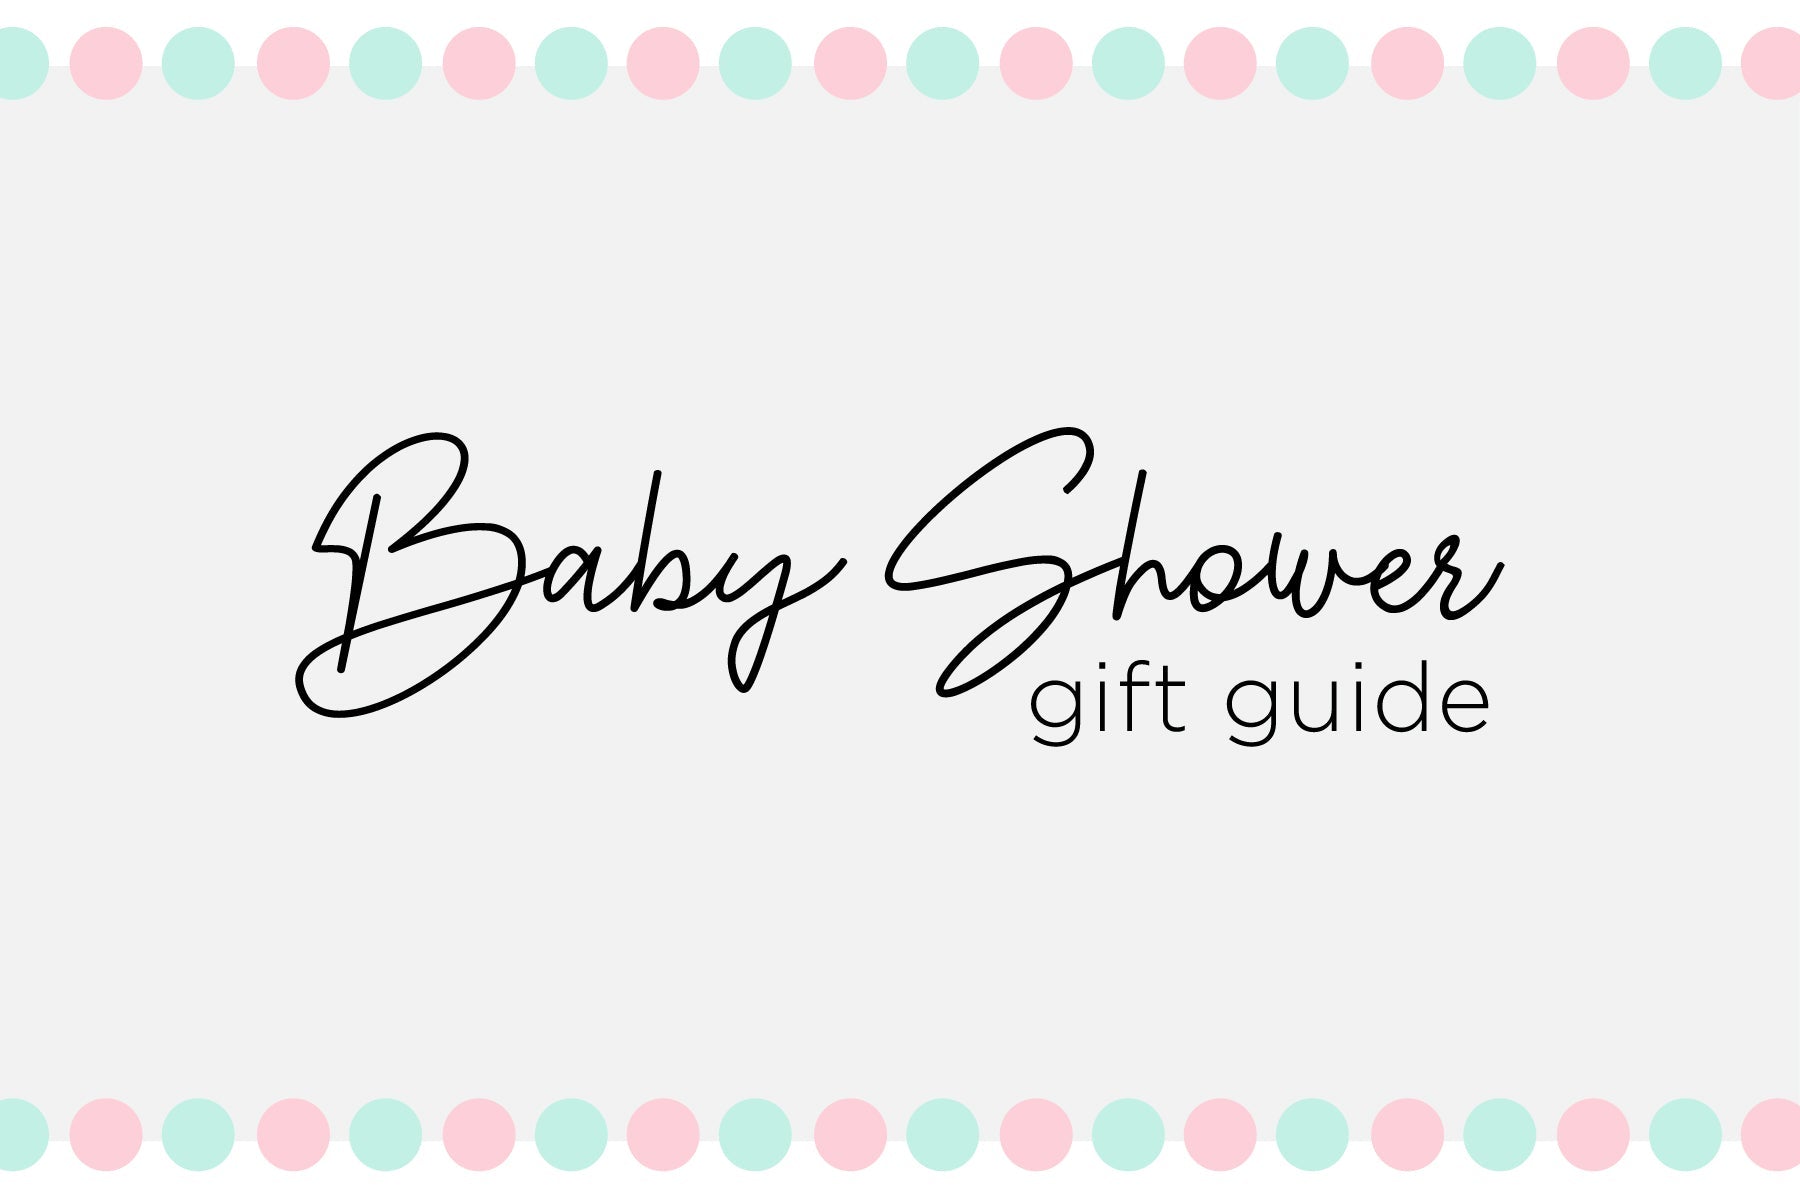 Baby Shower Gift Guide